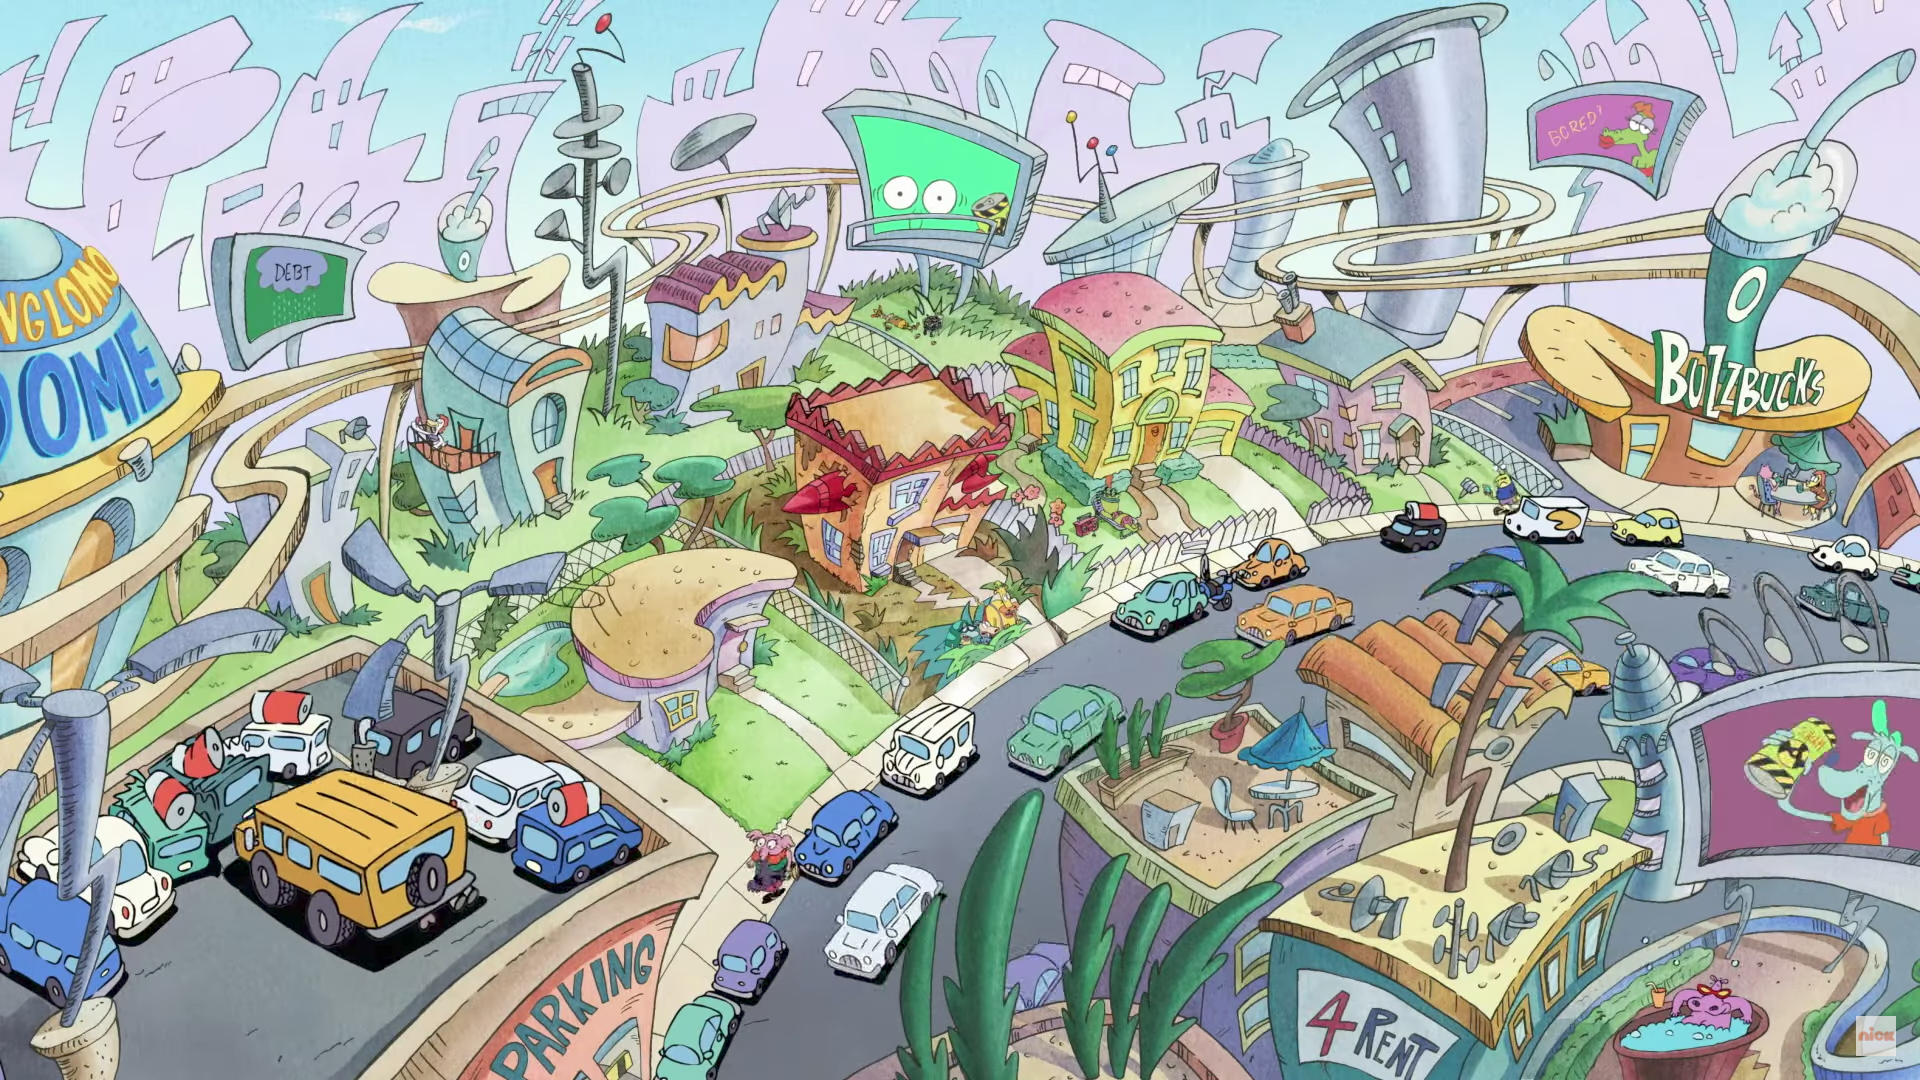 A still from the upcoming Rocko's Modern Life reboot by Nickelodeon. Photo by: Nickelodeon / YouTube